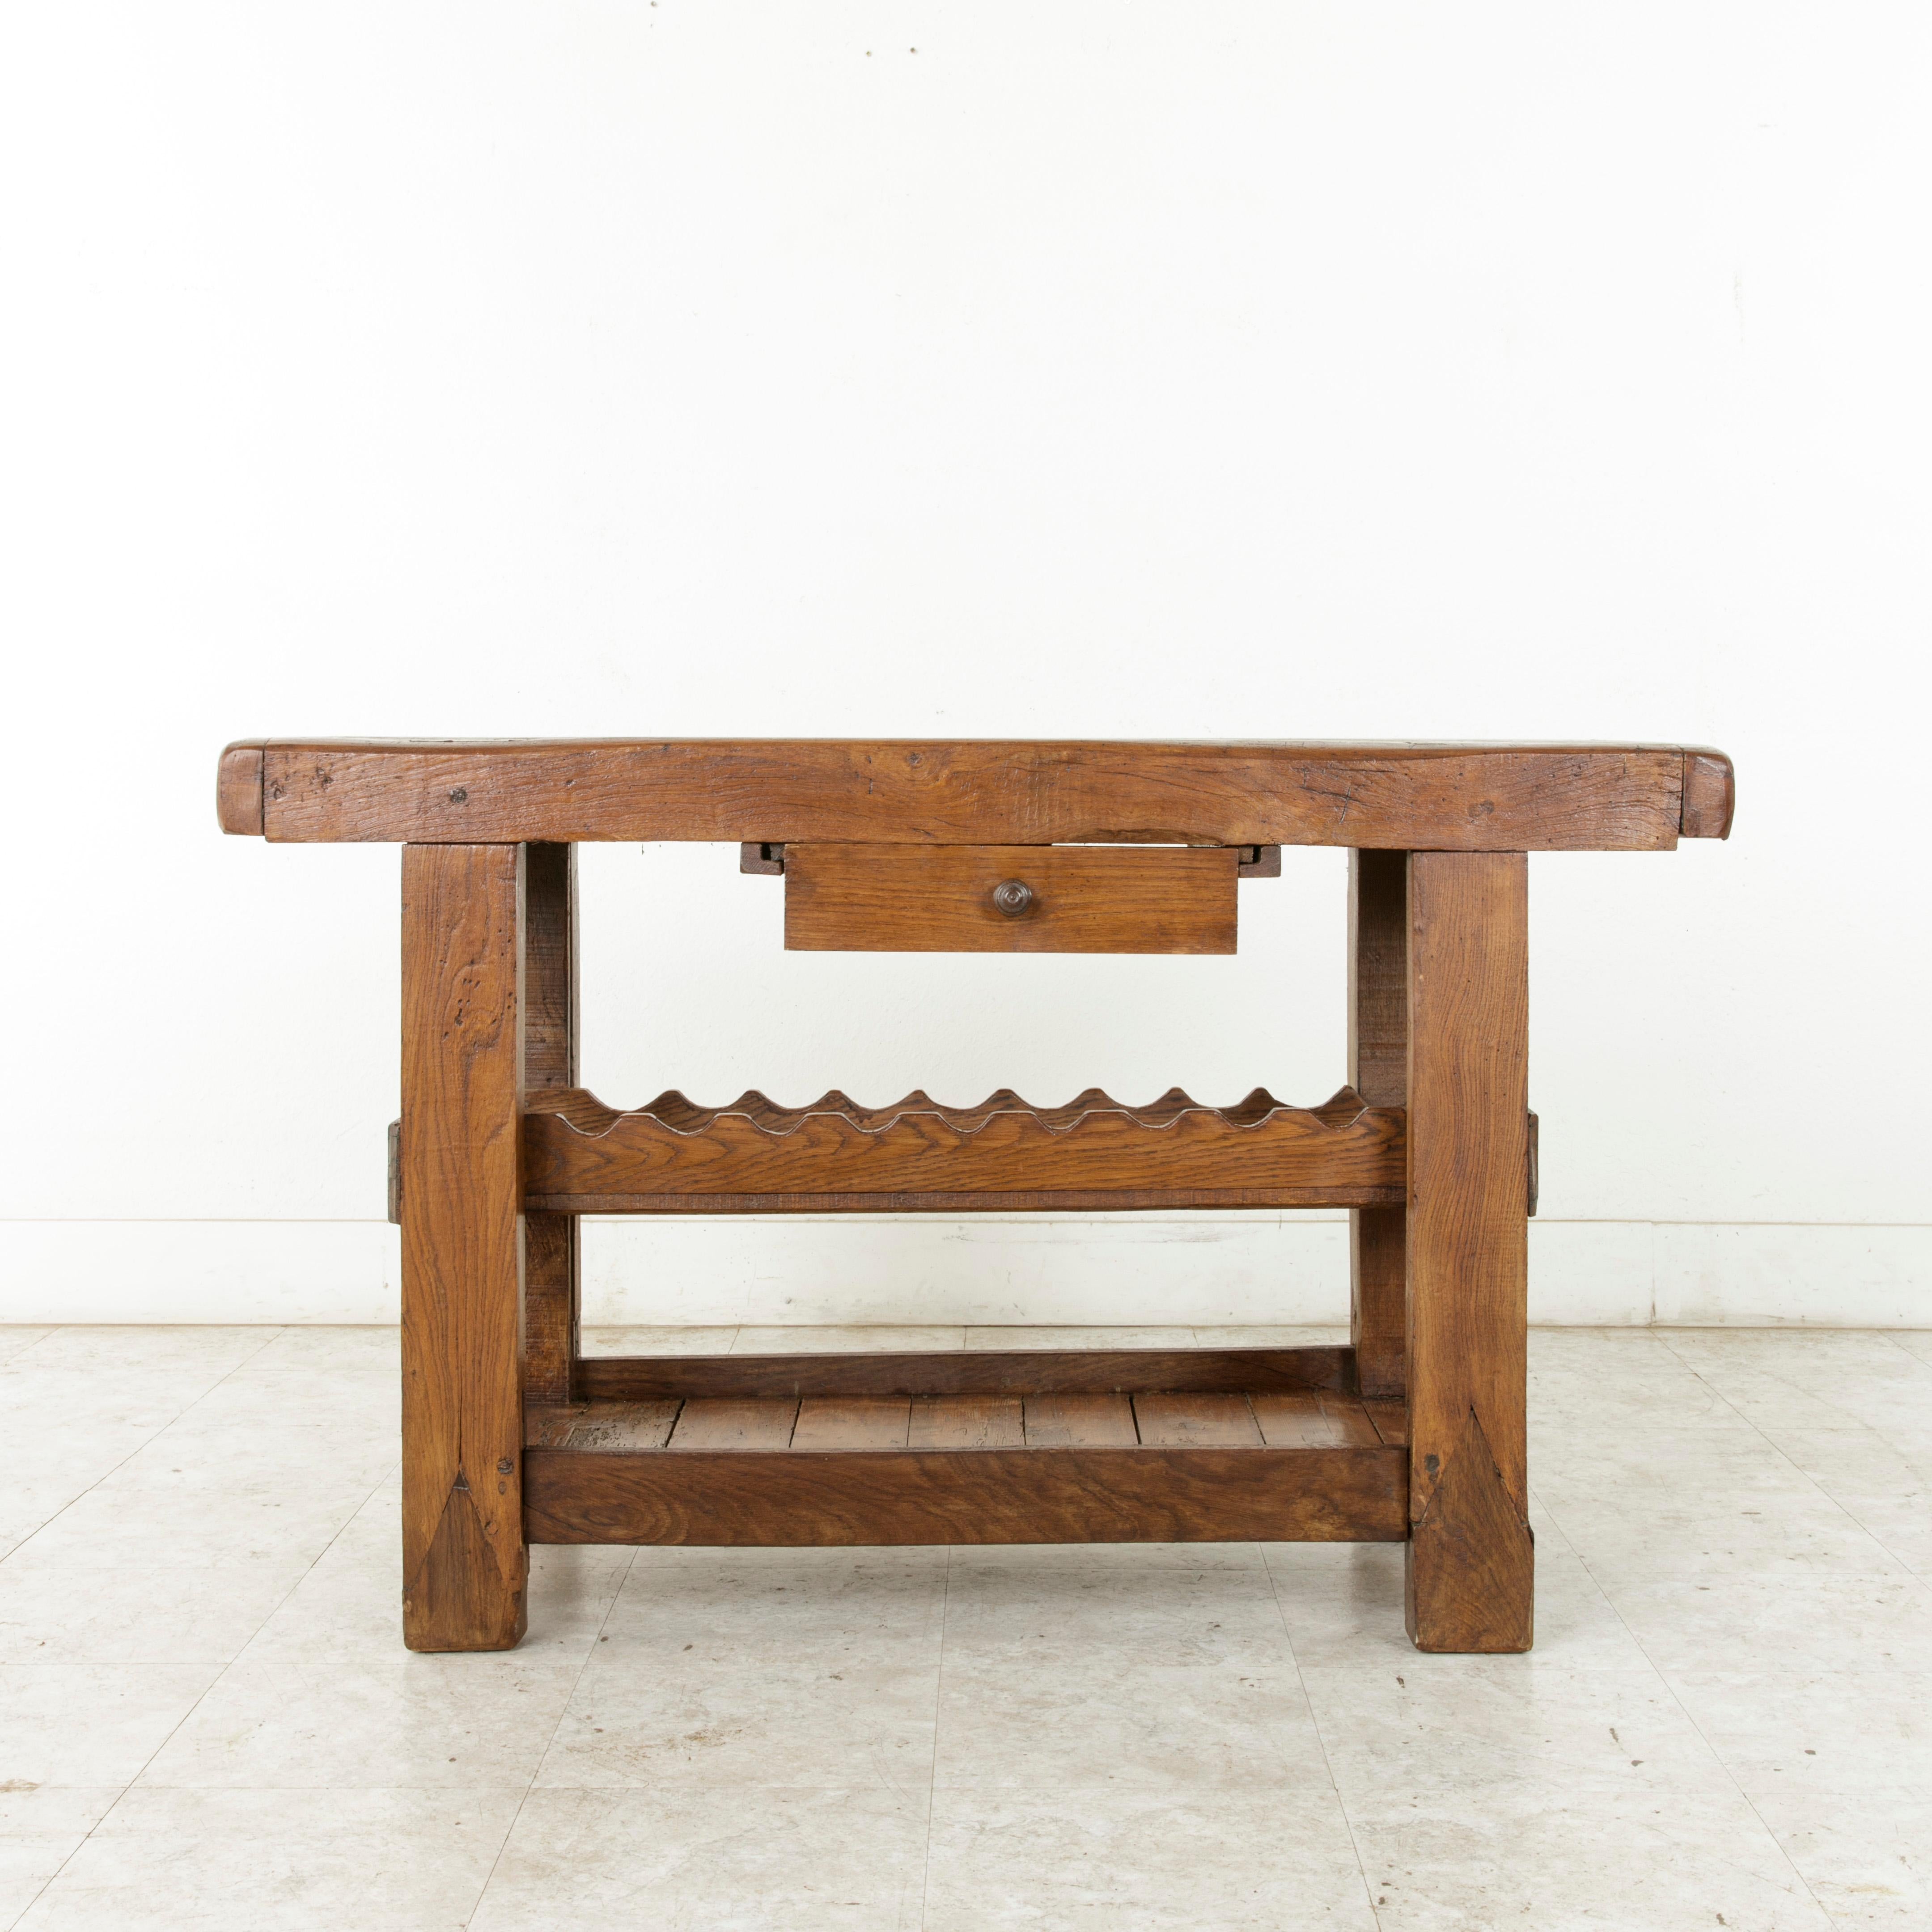 Rustic Late 19th Century French Oak Work Bench, Console Table, Sofa Table, or Dry Bar